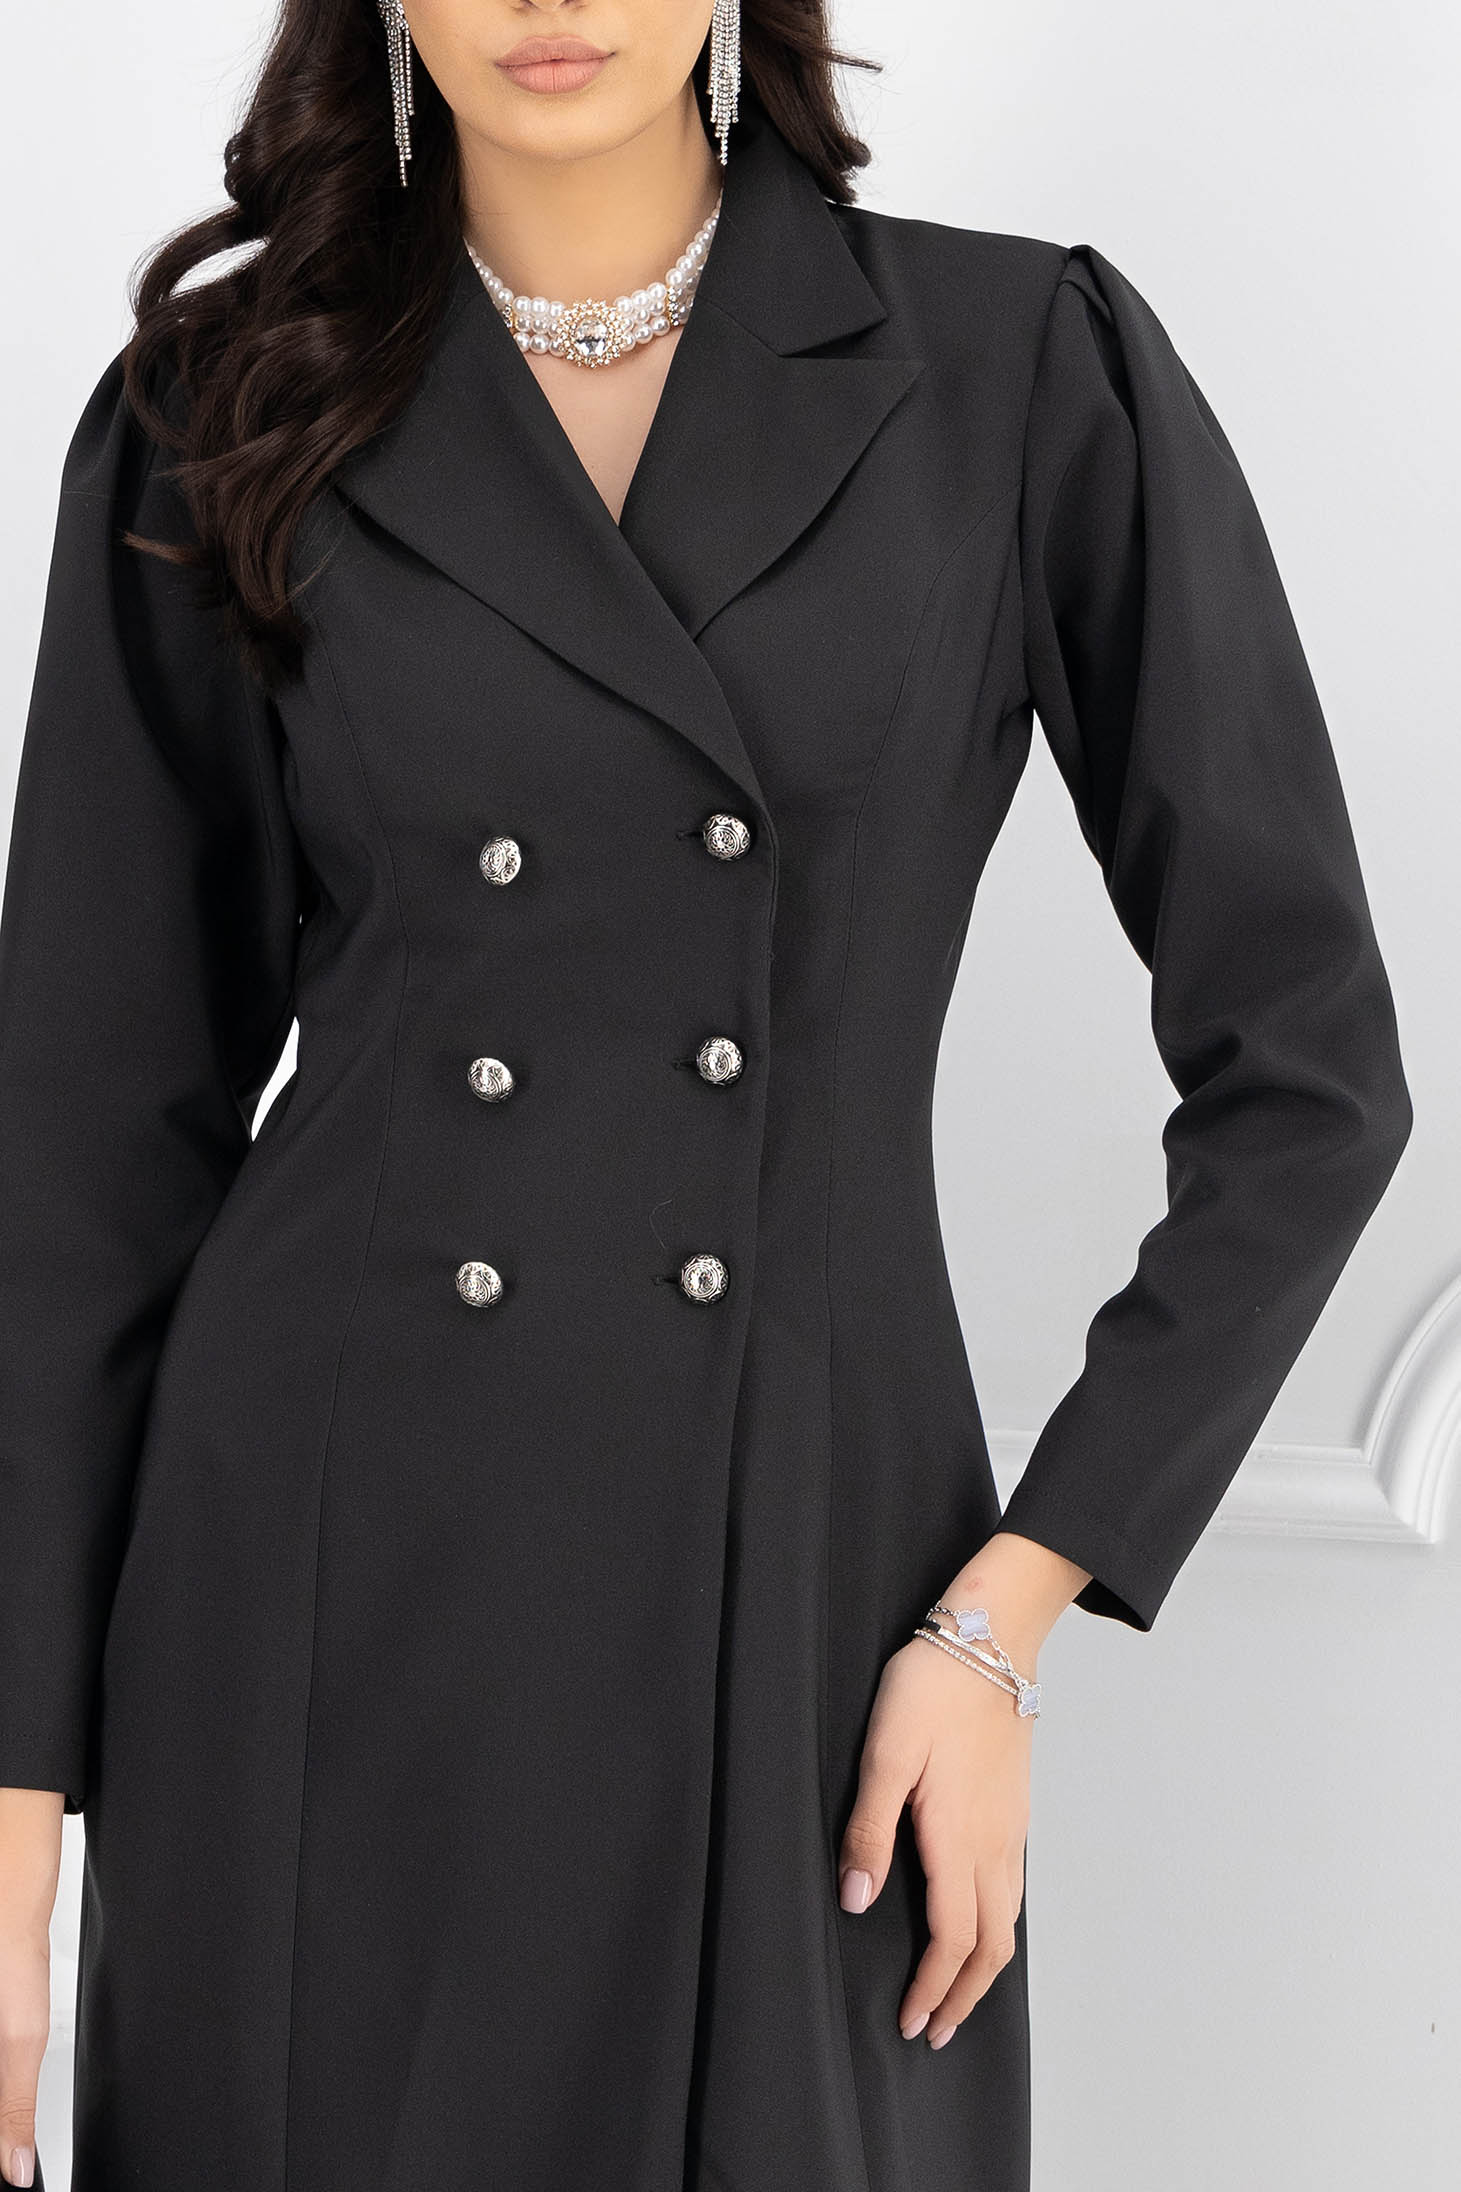 Black dress blazer type slightly elastic fabric with decorative buttons - StarShinerS high shoulders 4 - StarShinerS.com